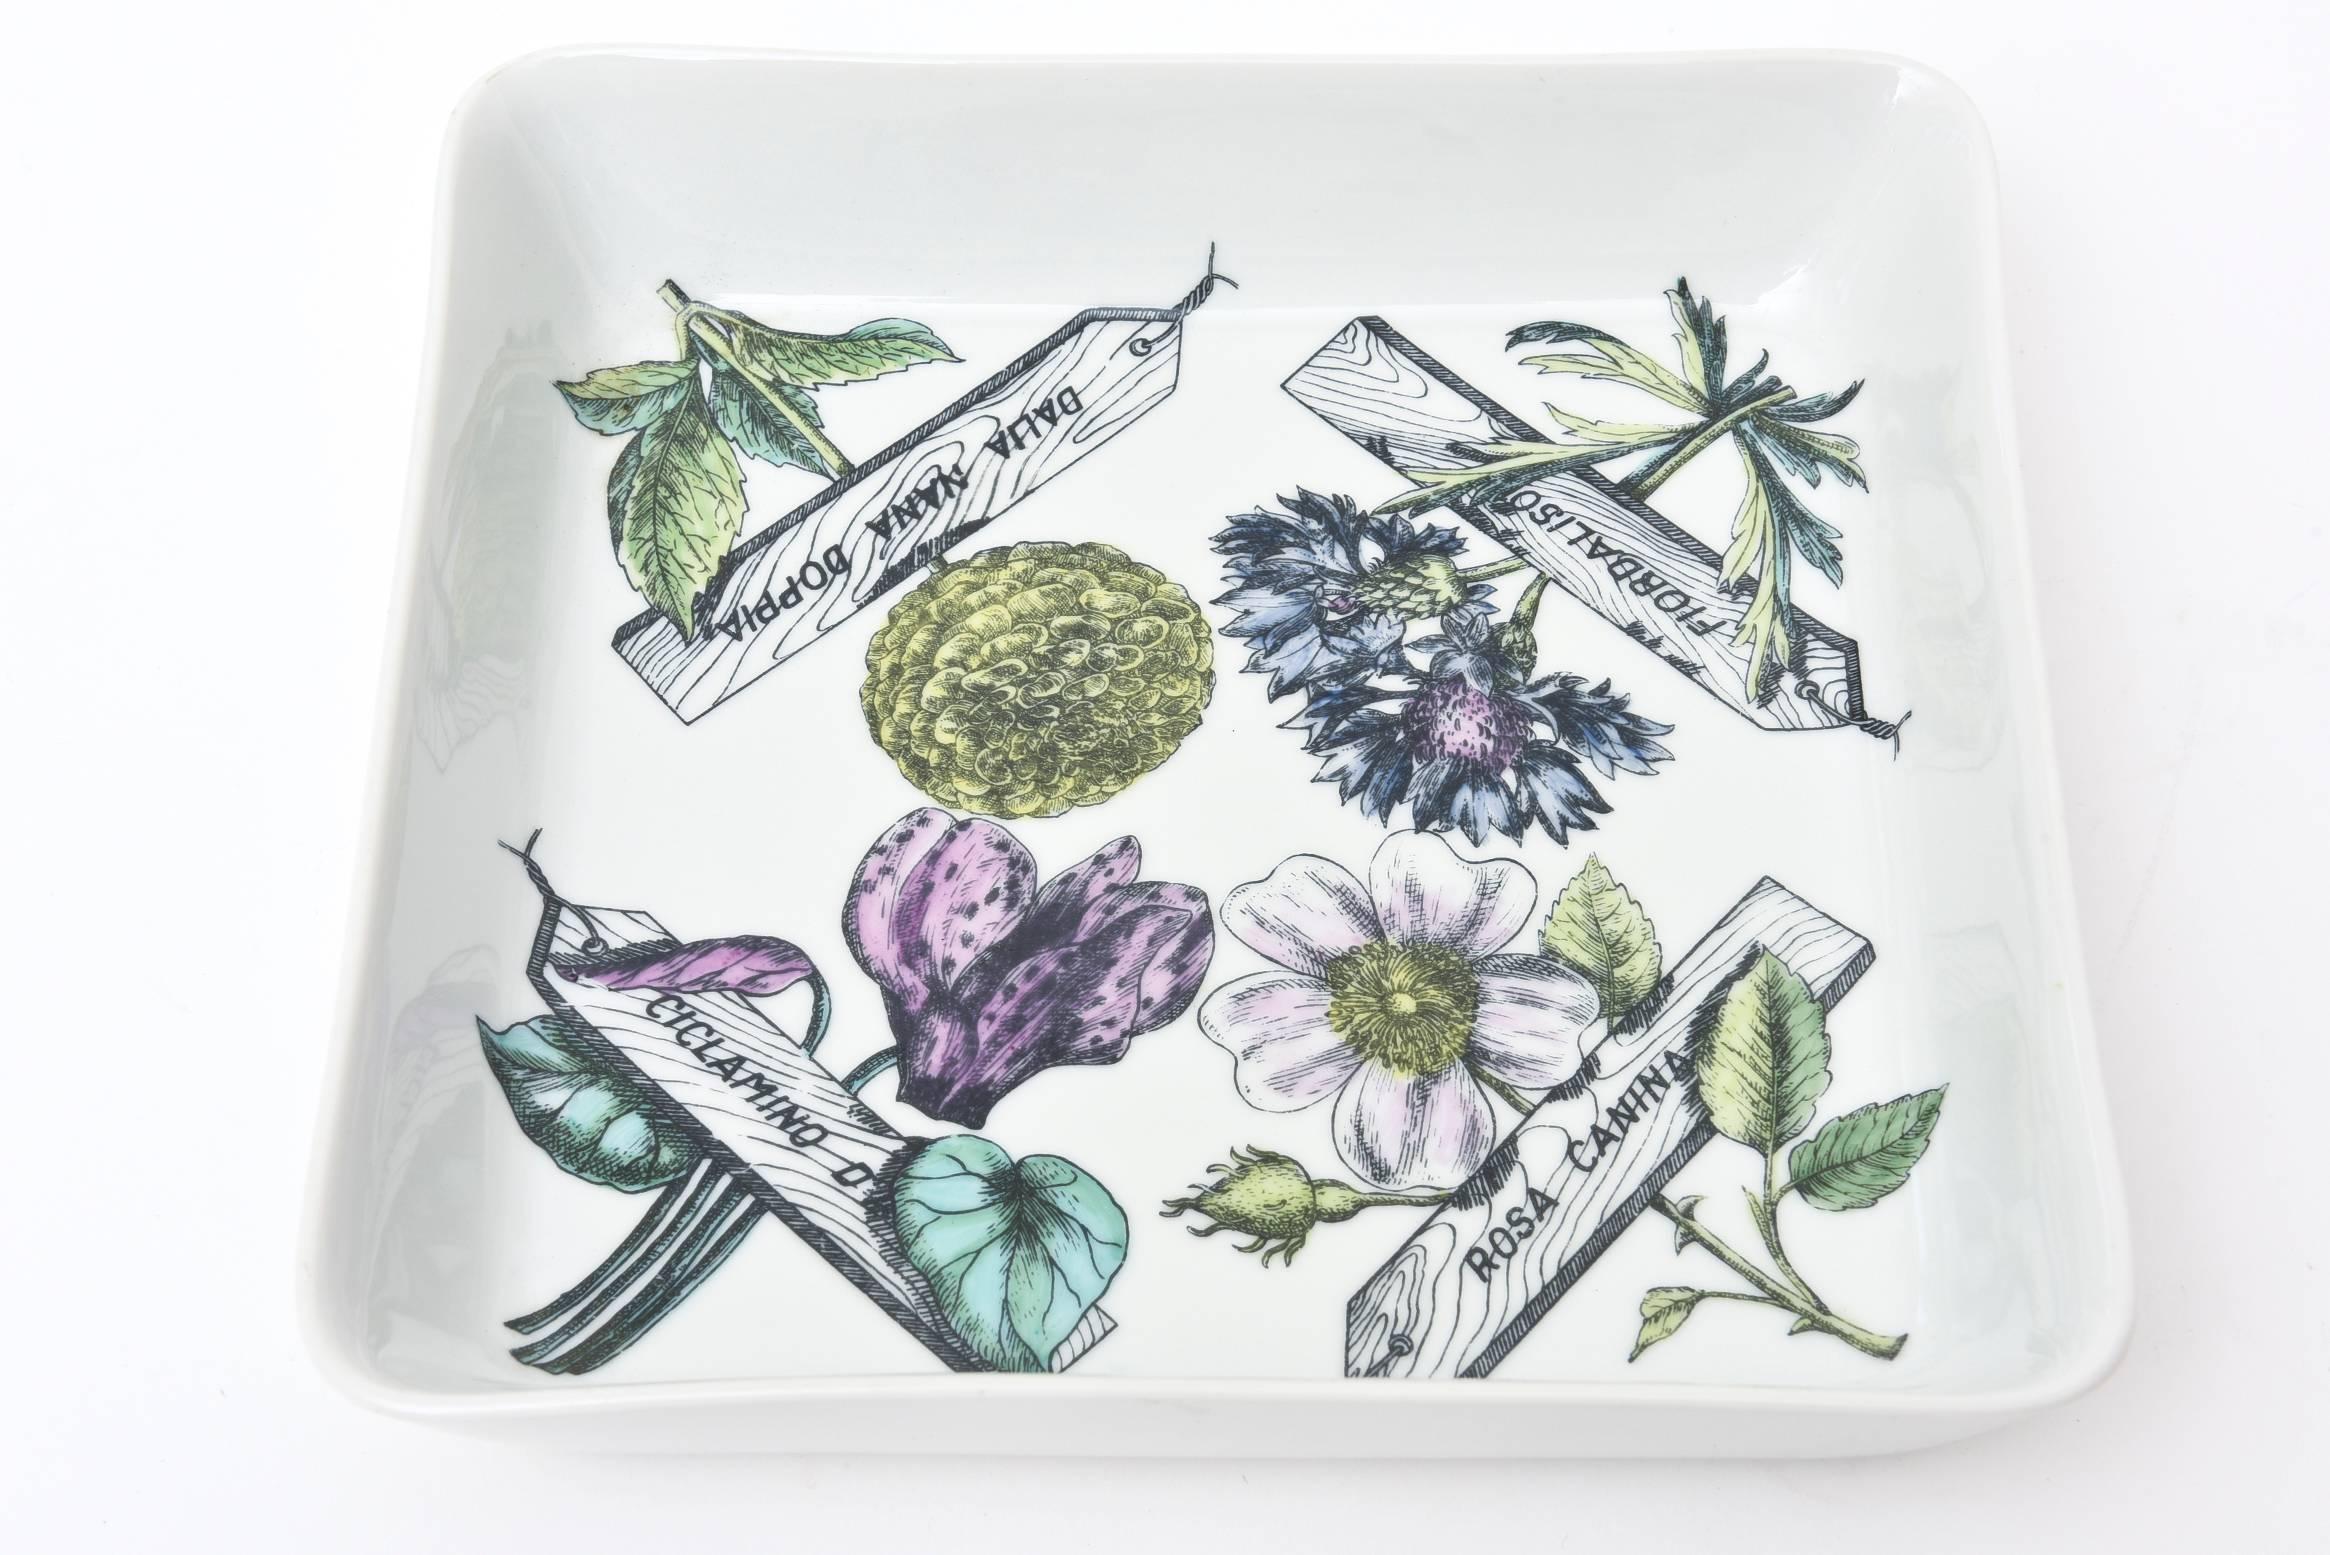 This wonderful substantial sized porcelain square vintage Mid-Century Modern Italian Piero Fornasetti bowl or serving piece has all the elements of botanicals and flowers and is entitled 